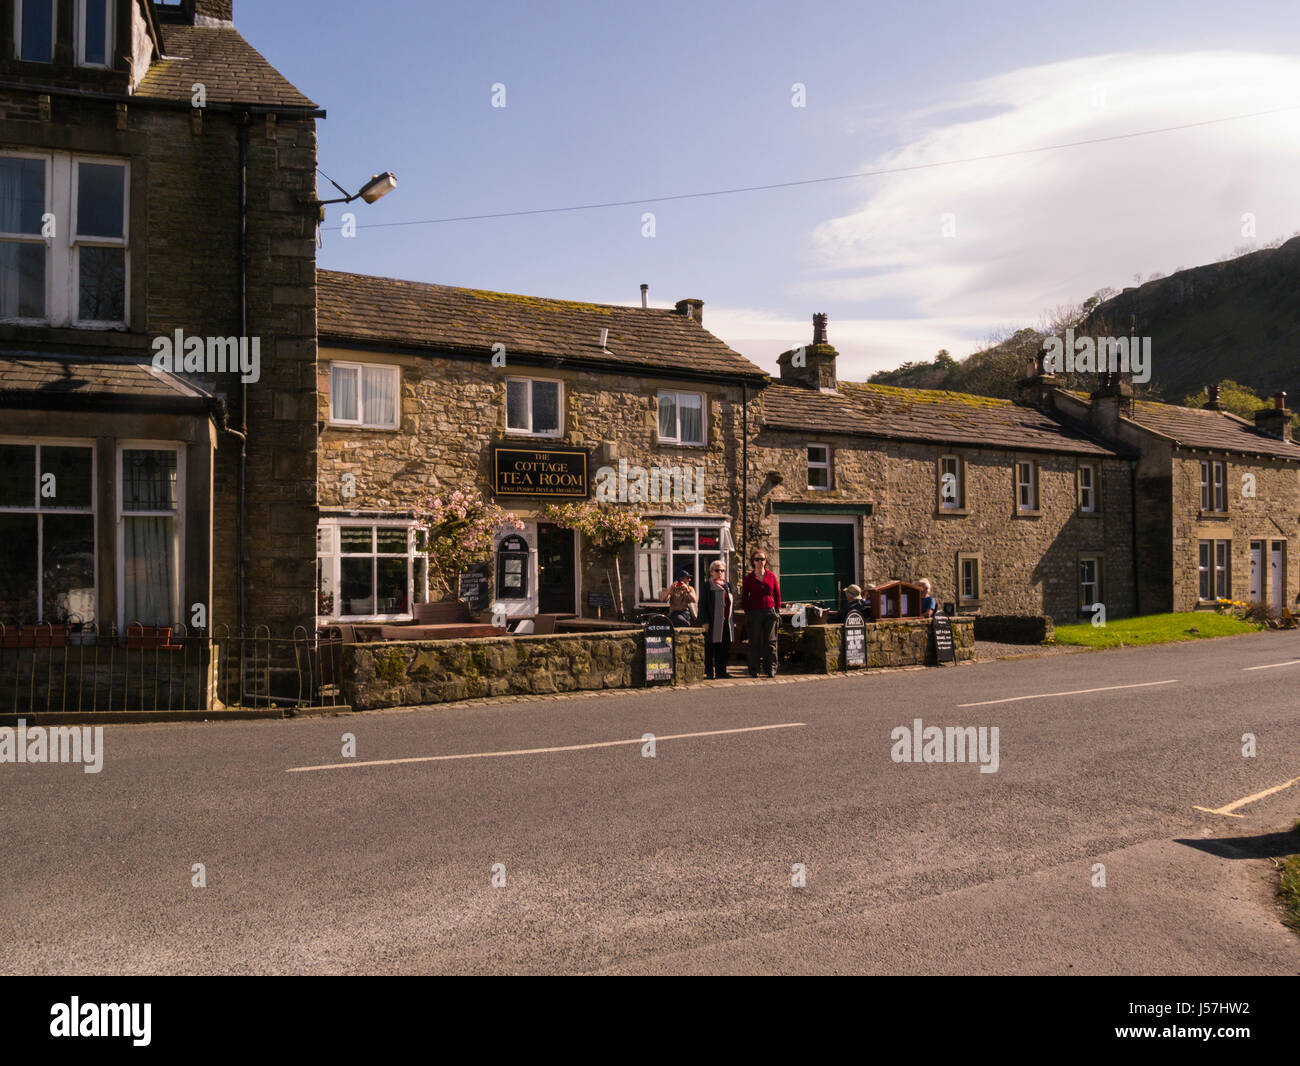 The Cottage Tea Room Bed and Breakfast Kettlewell village Upper Wharfedale Yorkshire Dales National Park North Yorkshire Great Britain GB UK Stock Photo